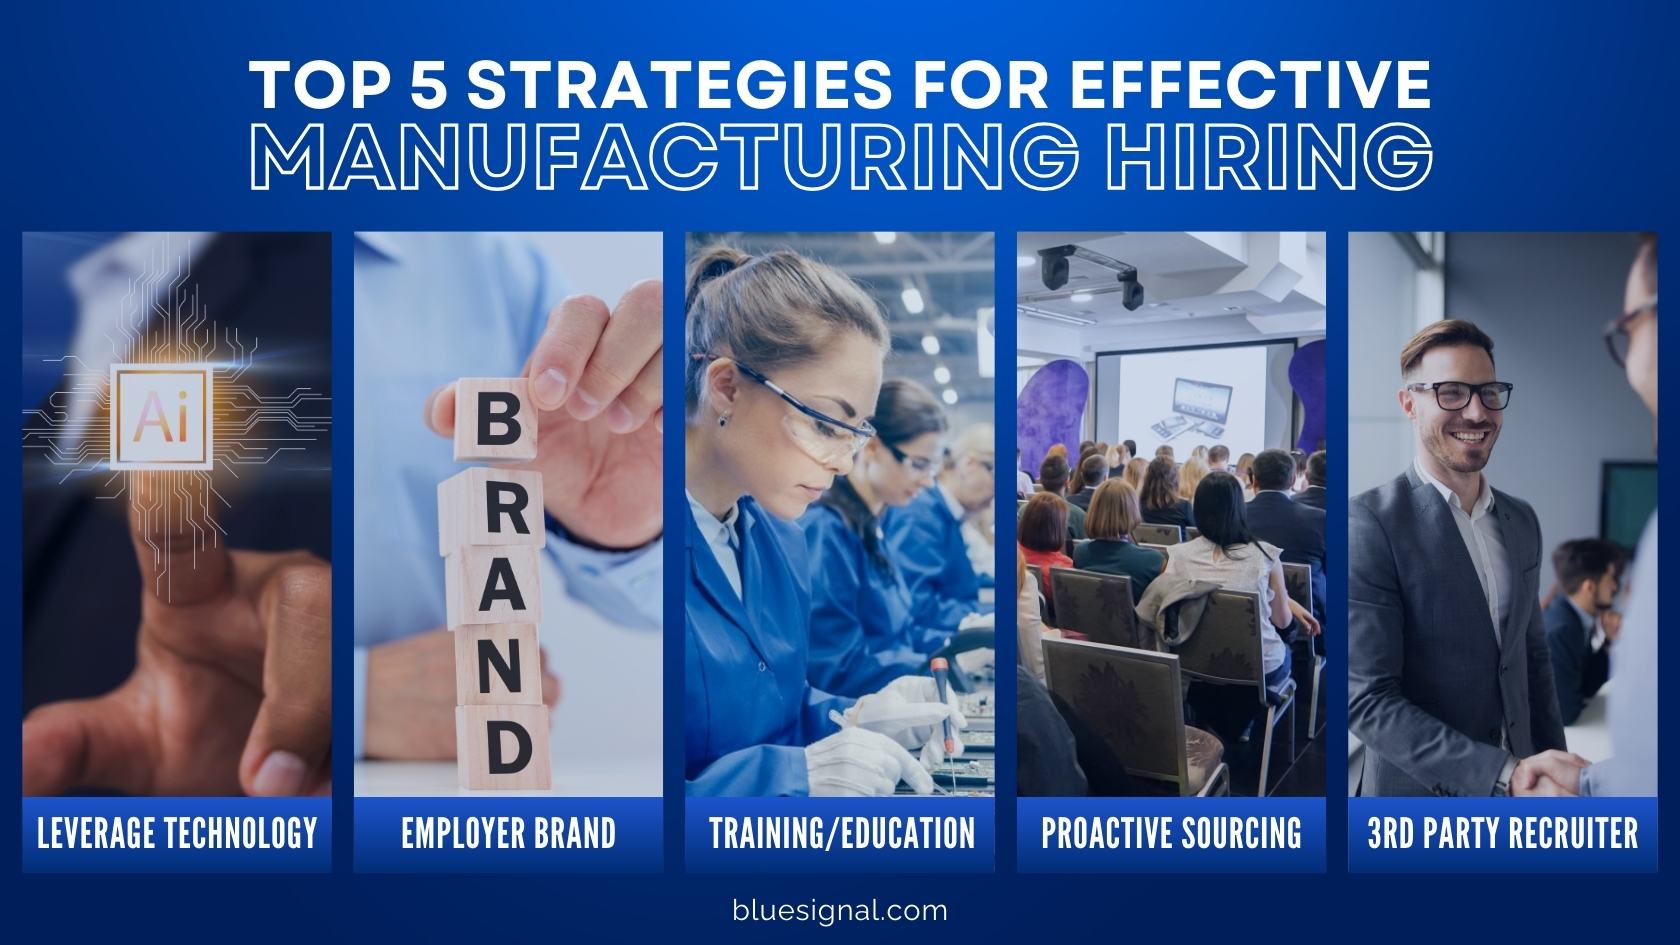 Collage of five key strategies for manufacturing hiring: leveraging technology with AI, building a strong employer brand, enhancing training and education, proactive sourcing, and partnering with a 3rd party recruiter.